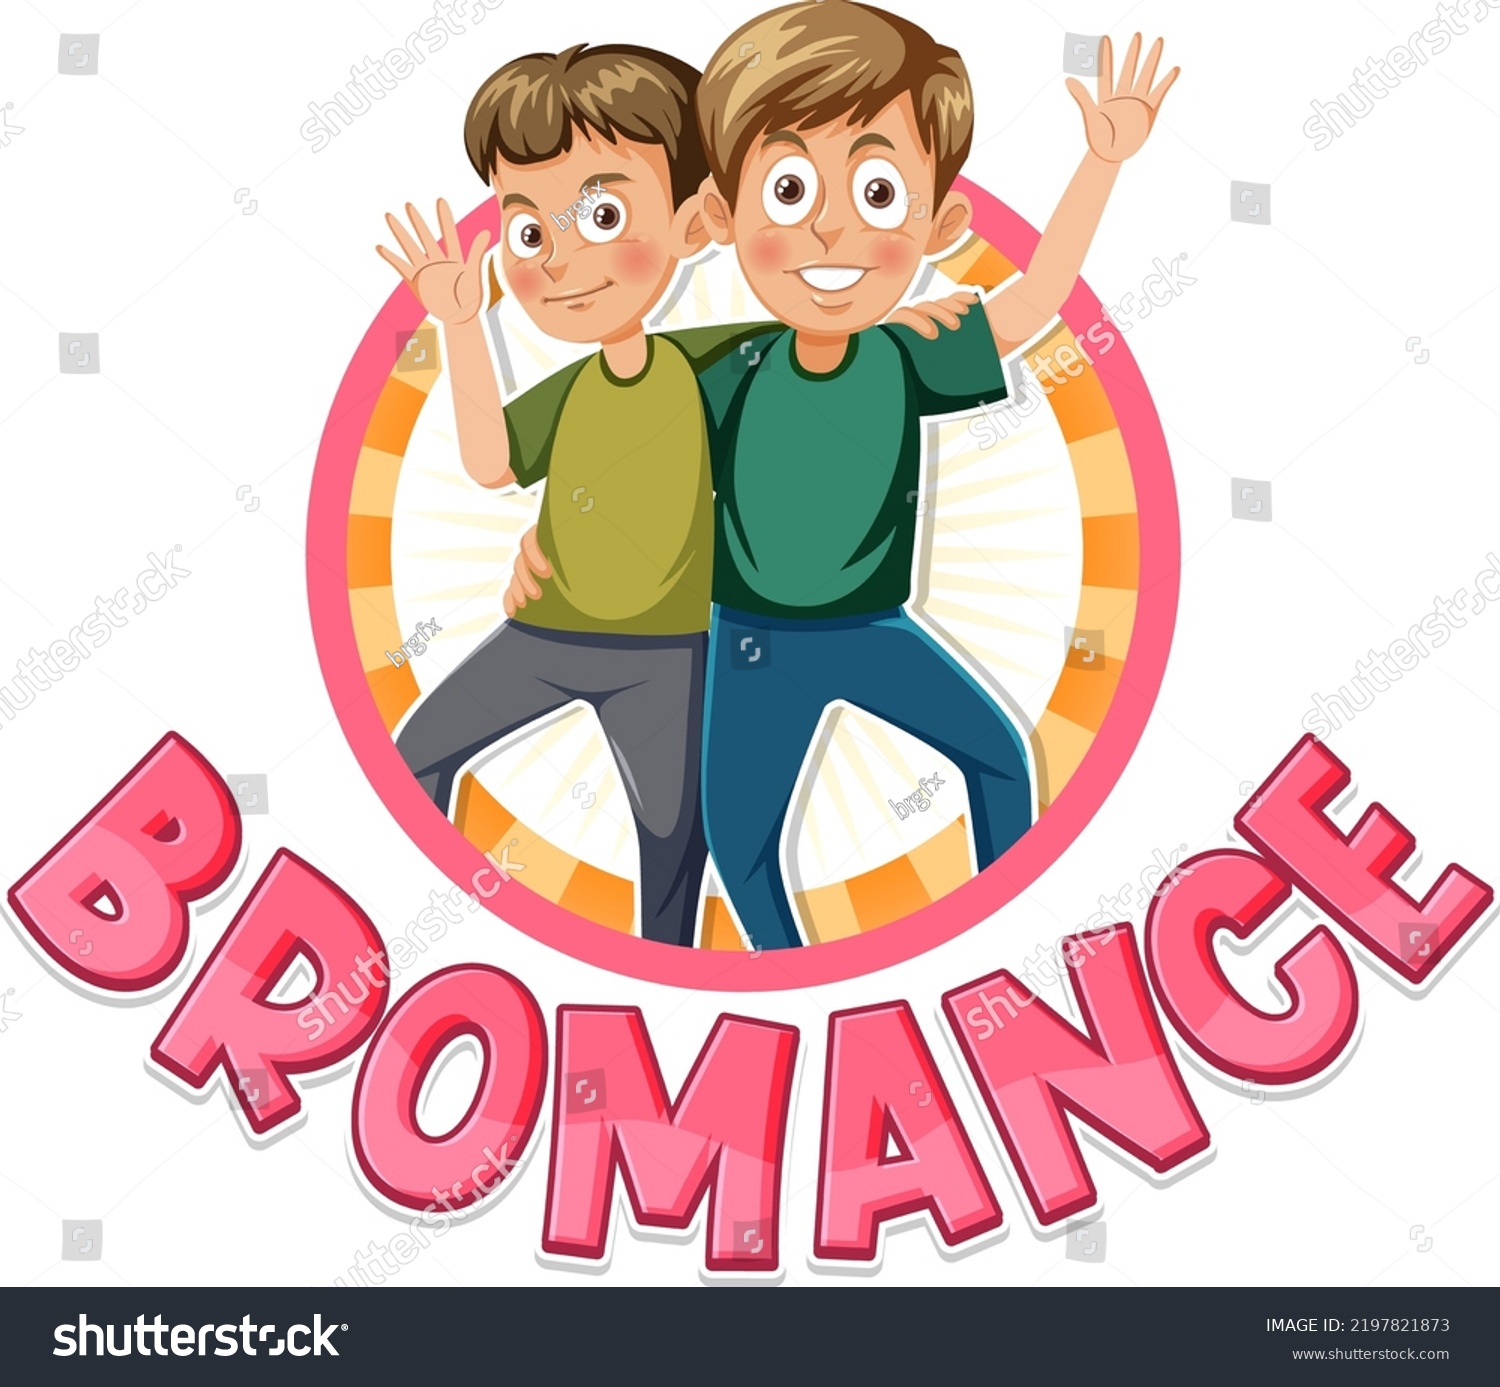 Cute cartoon character with bromance icon - Royalty Free Stock Vector ...